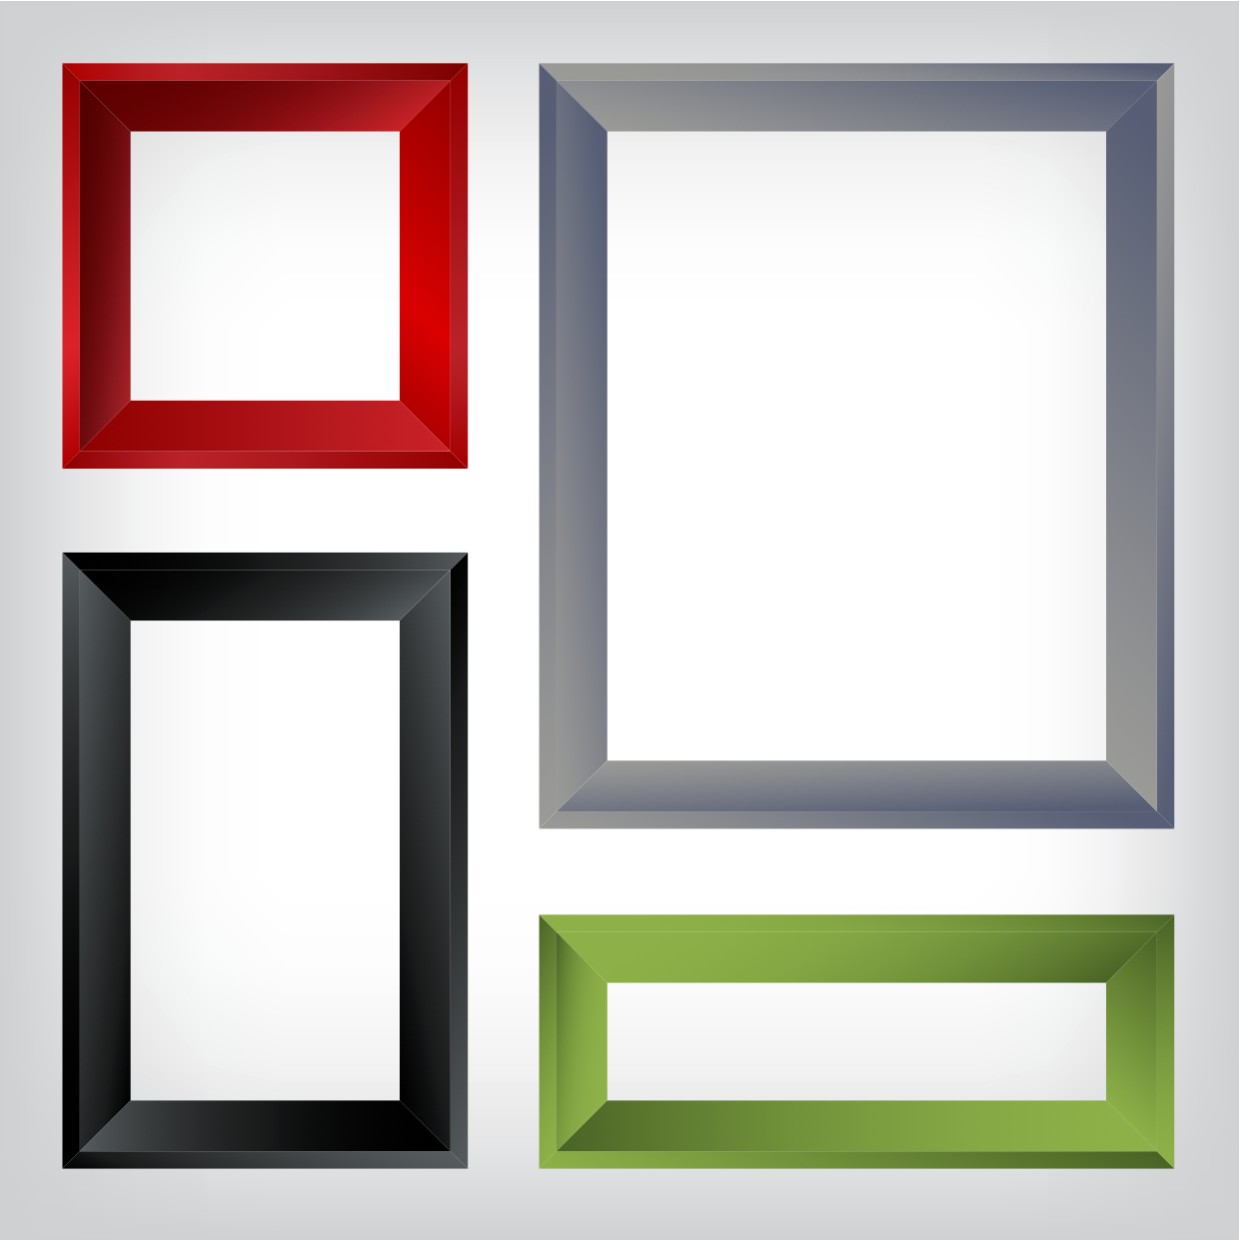 An image of four frames of various sizes and colors